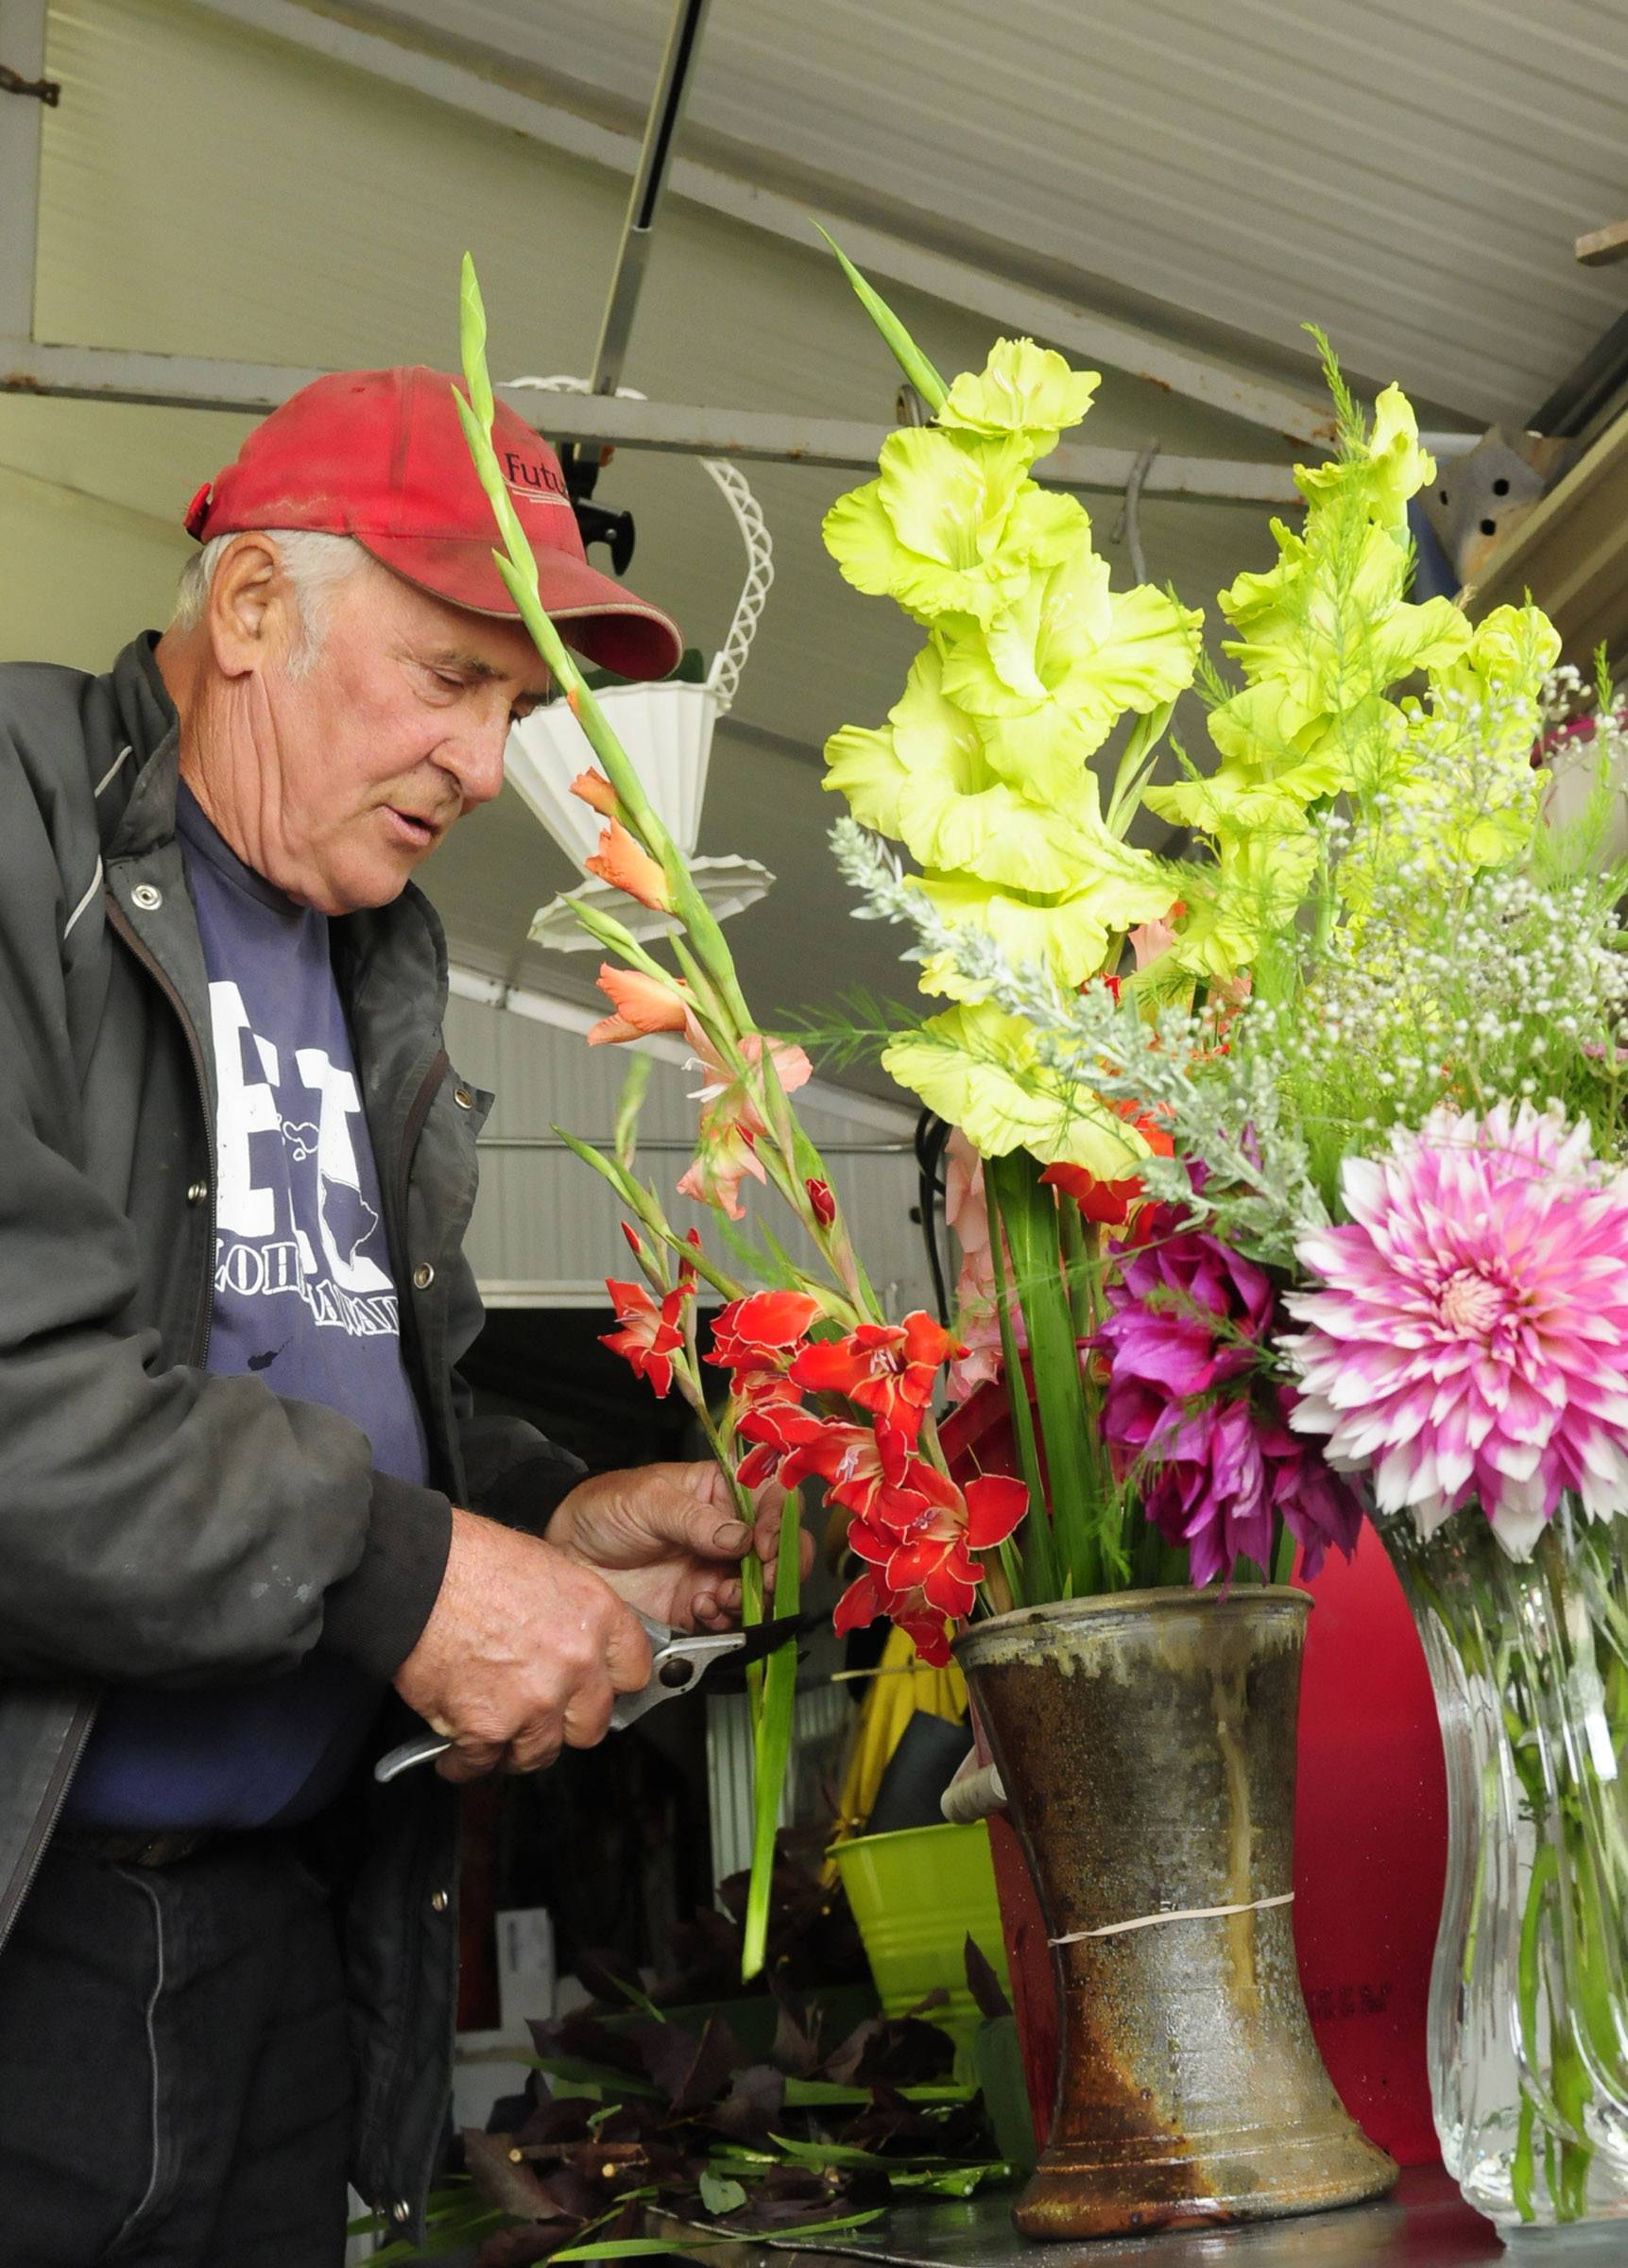 PERFECT BUNCH-Lorne McArthur has turned his hobby of growing flowers into a passion towards growing dahlias and gladiolus